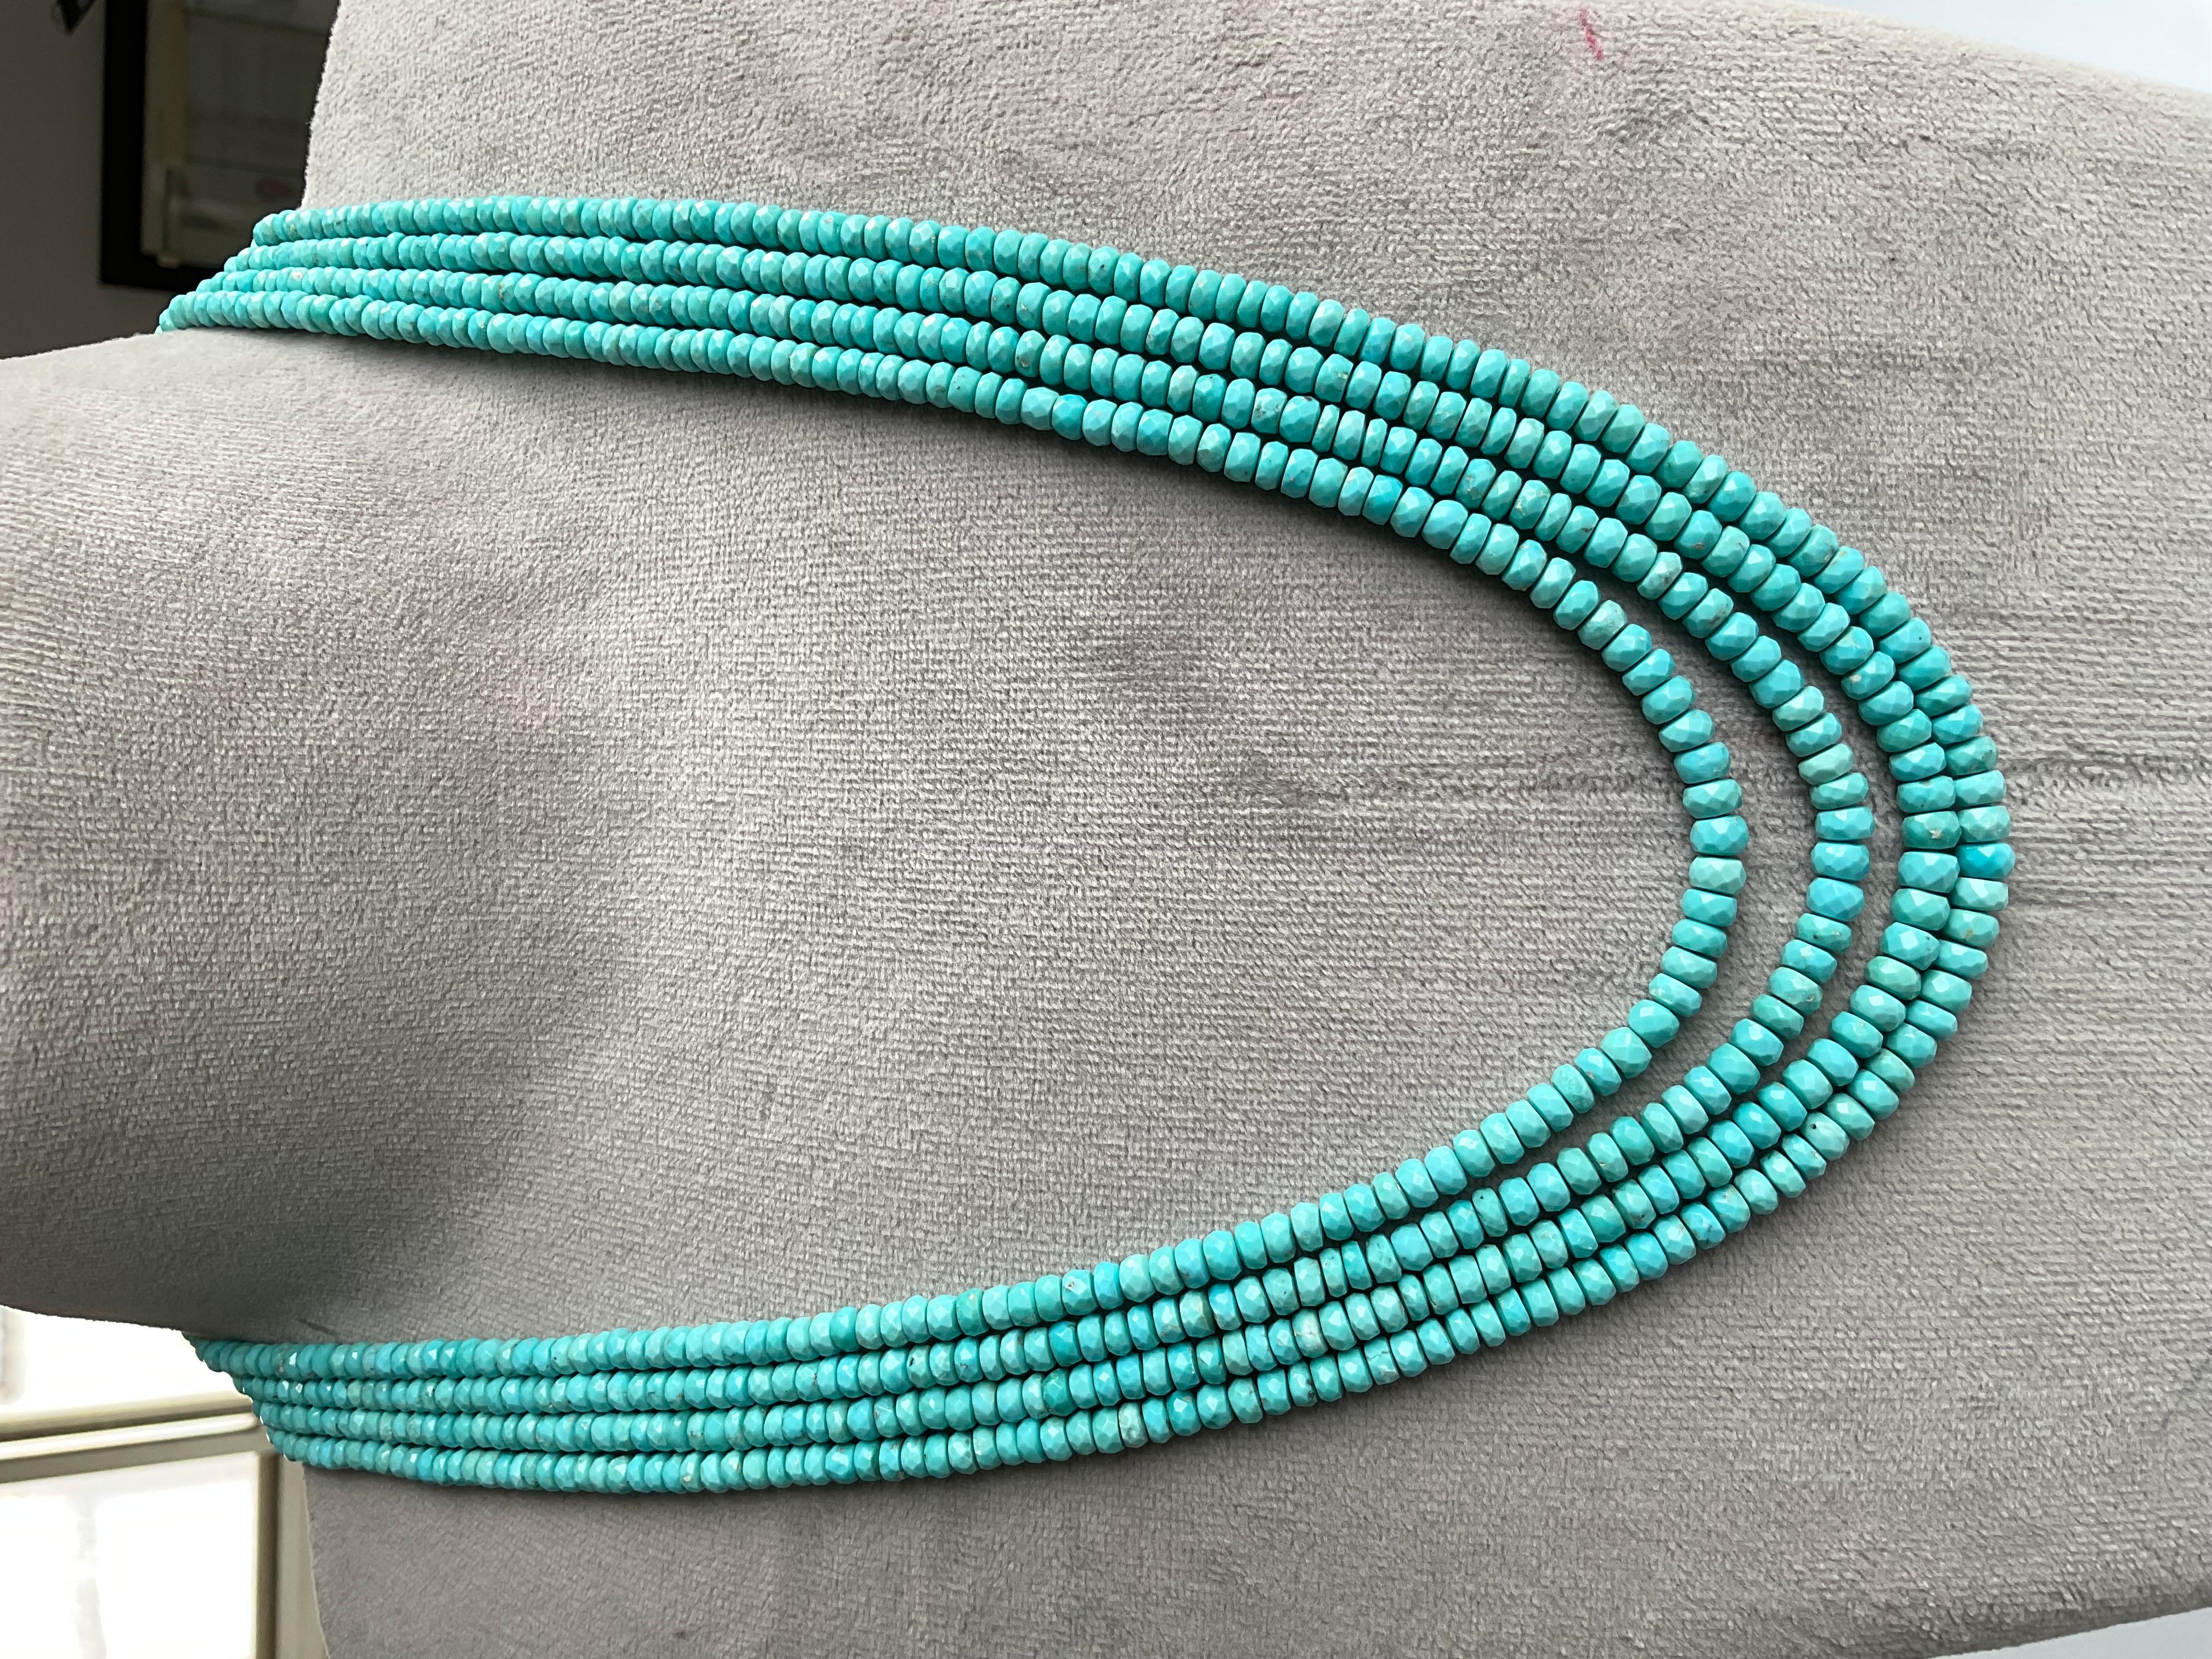 Art Deco 273.62 Carats Turquoise Jewelry Beaded Faceted Necklace Sleeping Beauty Arizona